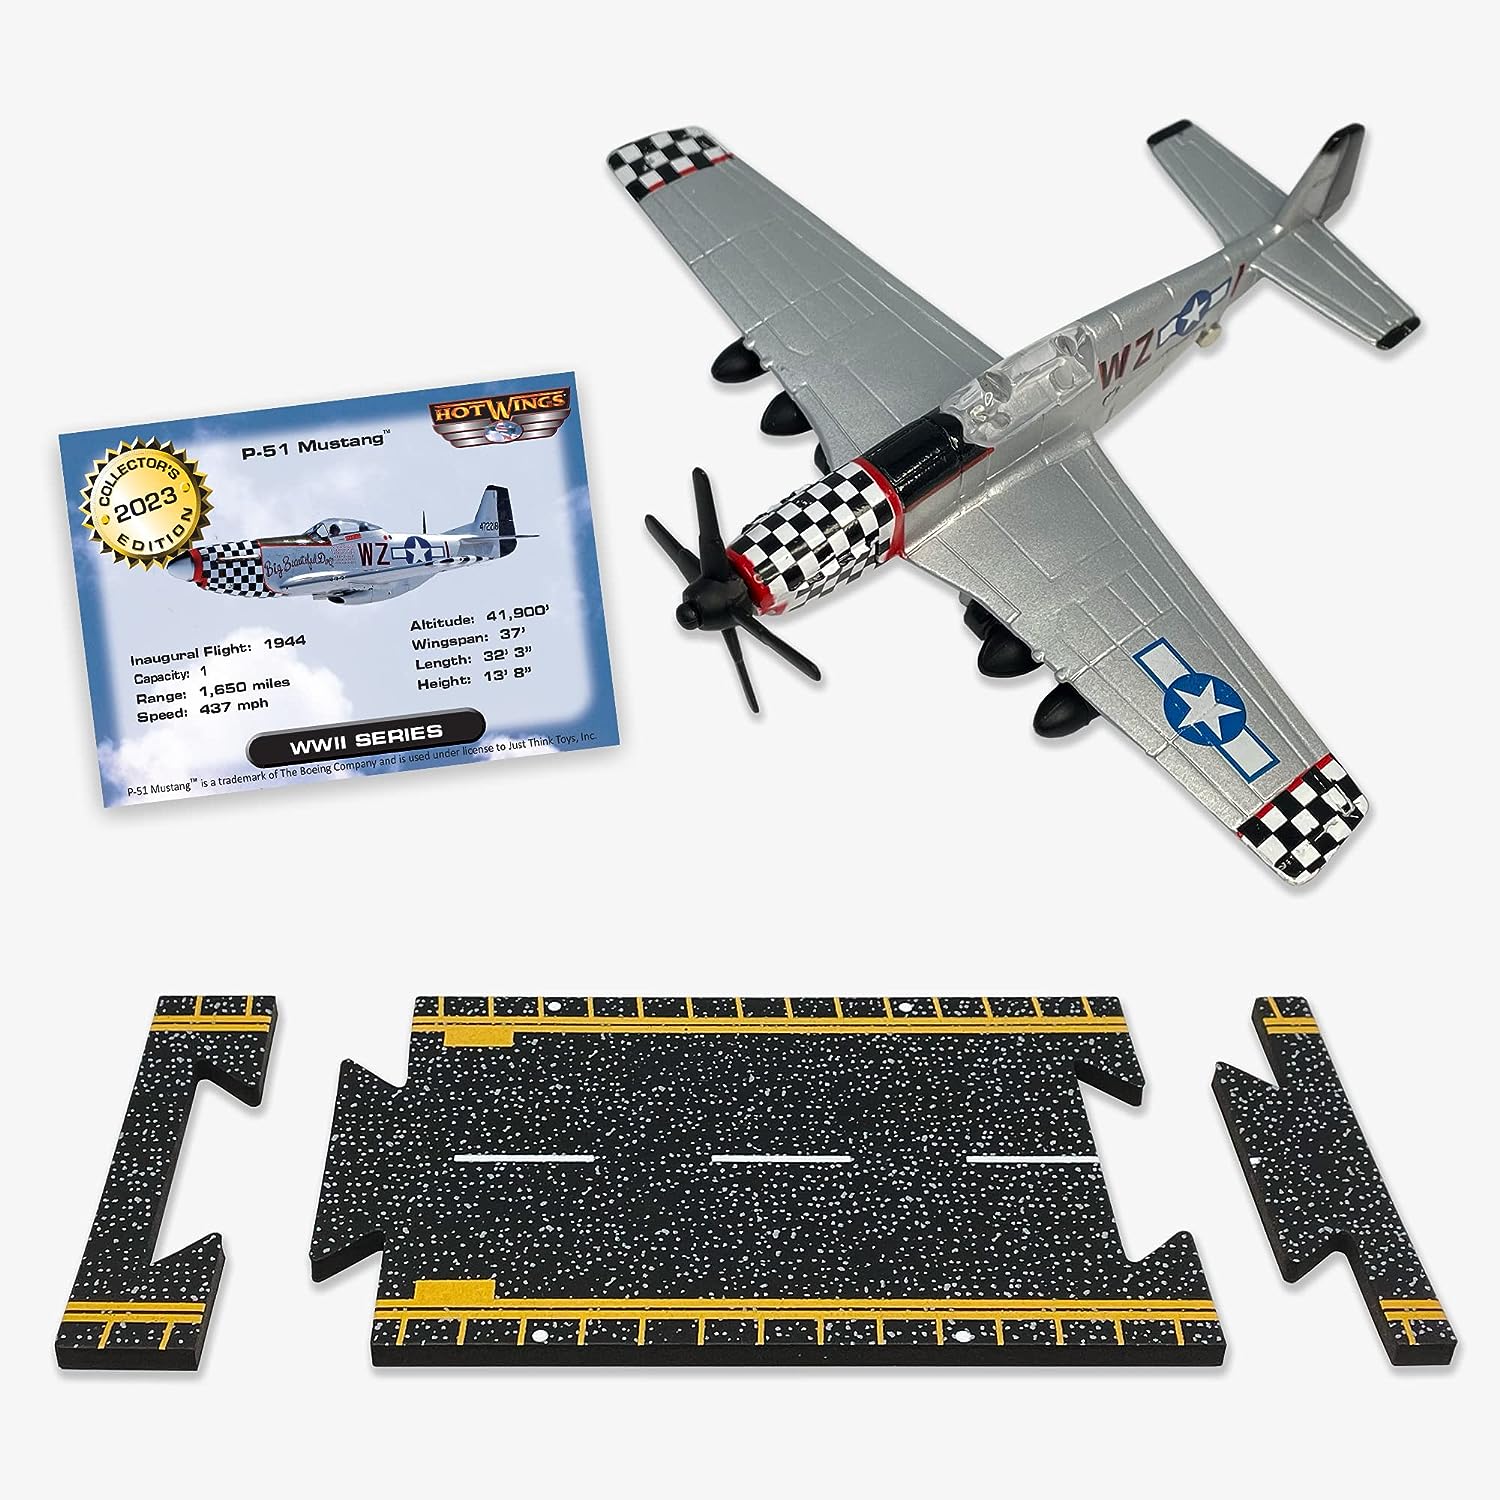 Hot Wings Planes P-51 Mustang with Connectible Runway – Ready Set Play